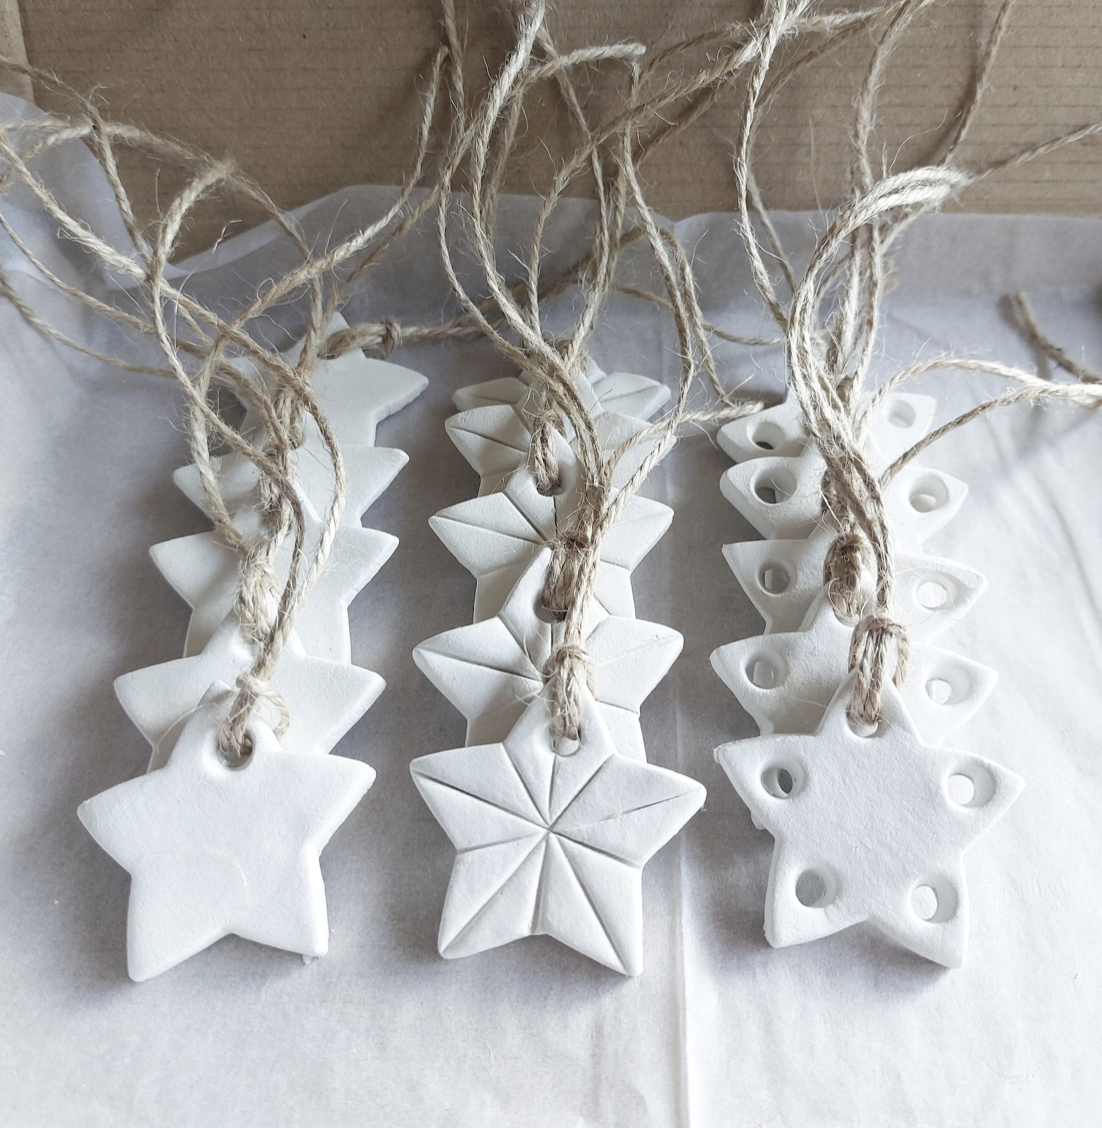 Clay and string tree decorations, £8.50 on Etsy